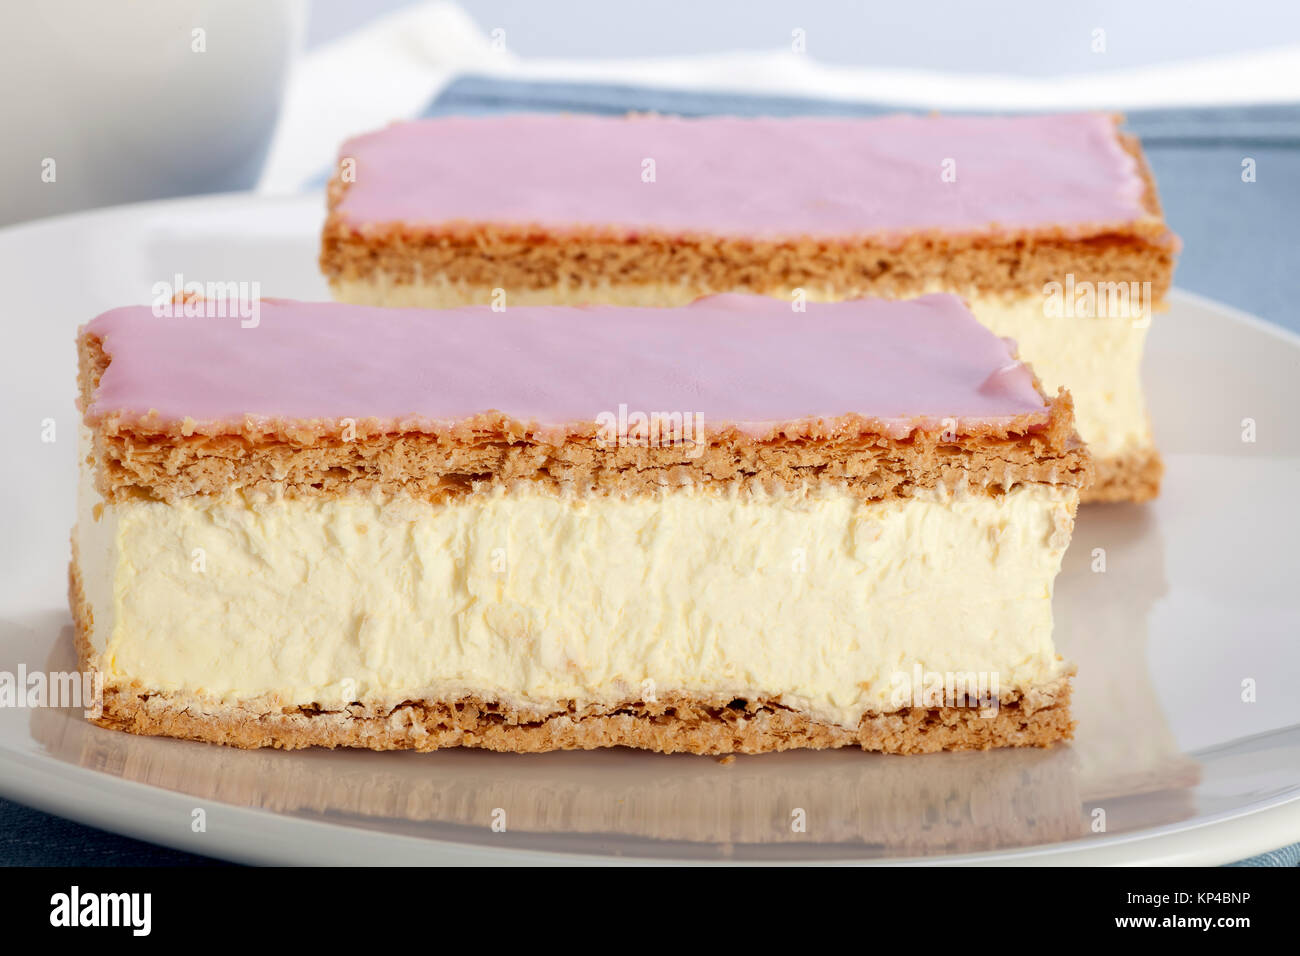 Tompouce A Common Pastry In The Netherlands And Belgium Made With Stock Photo Alamy